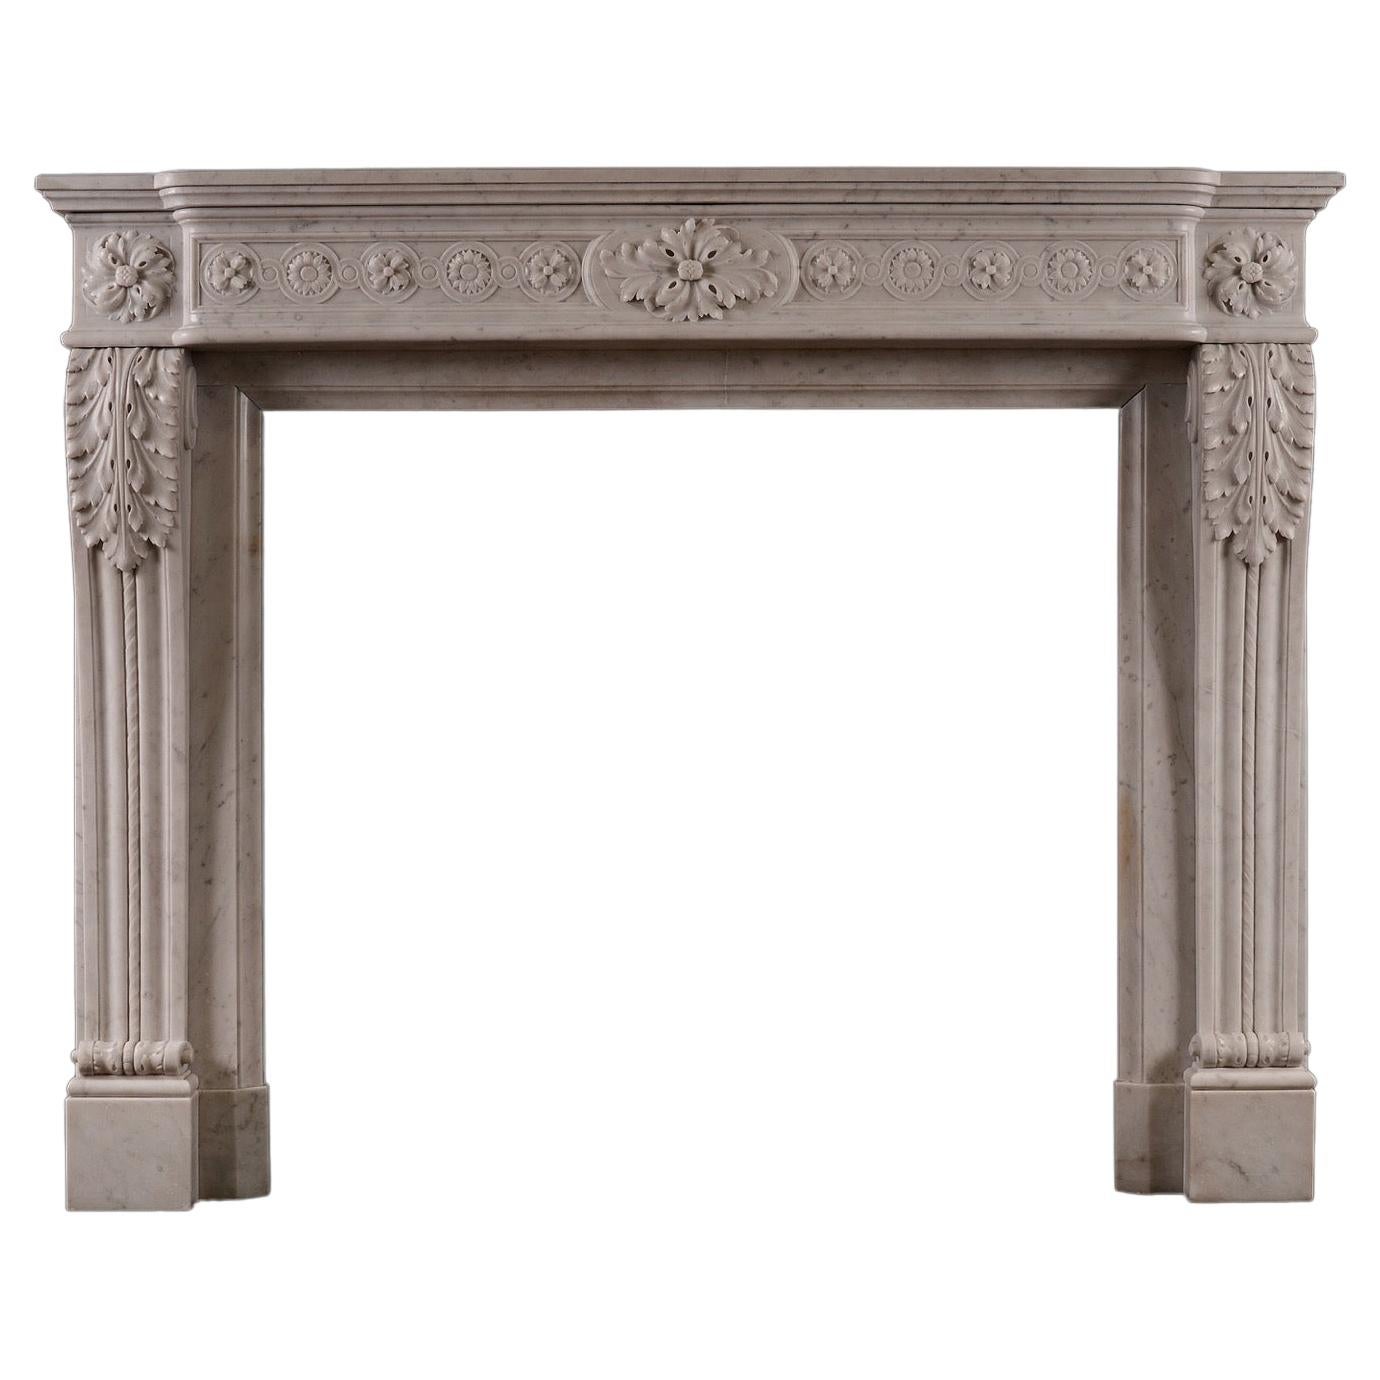 French Louis XVI Style Marble Fireplace in Carrara Marble For Sale